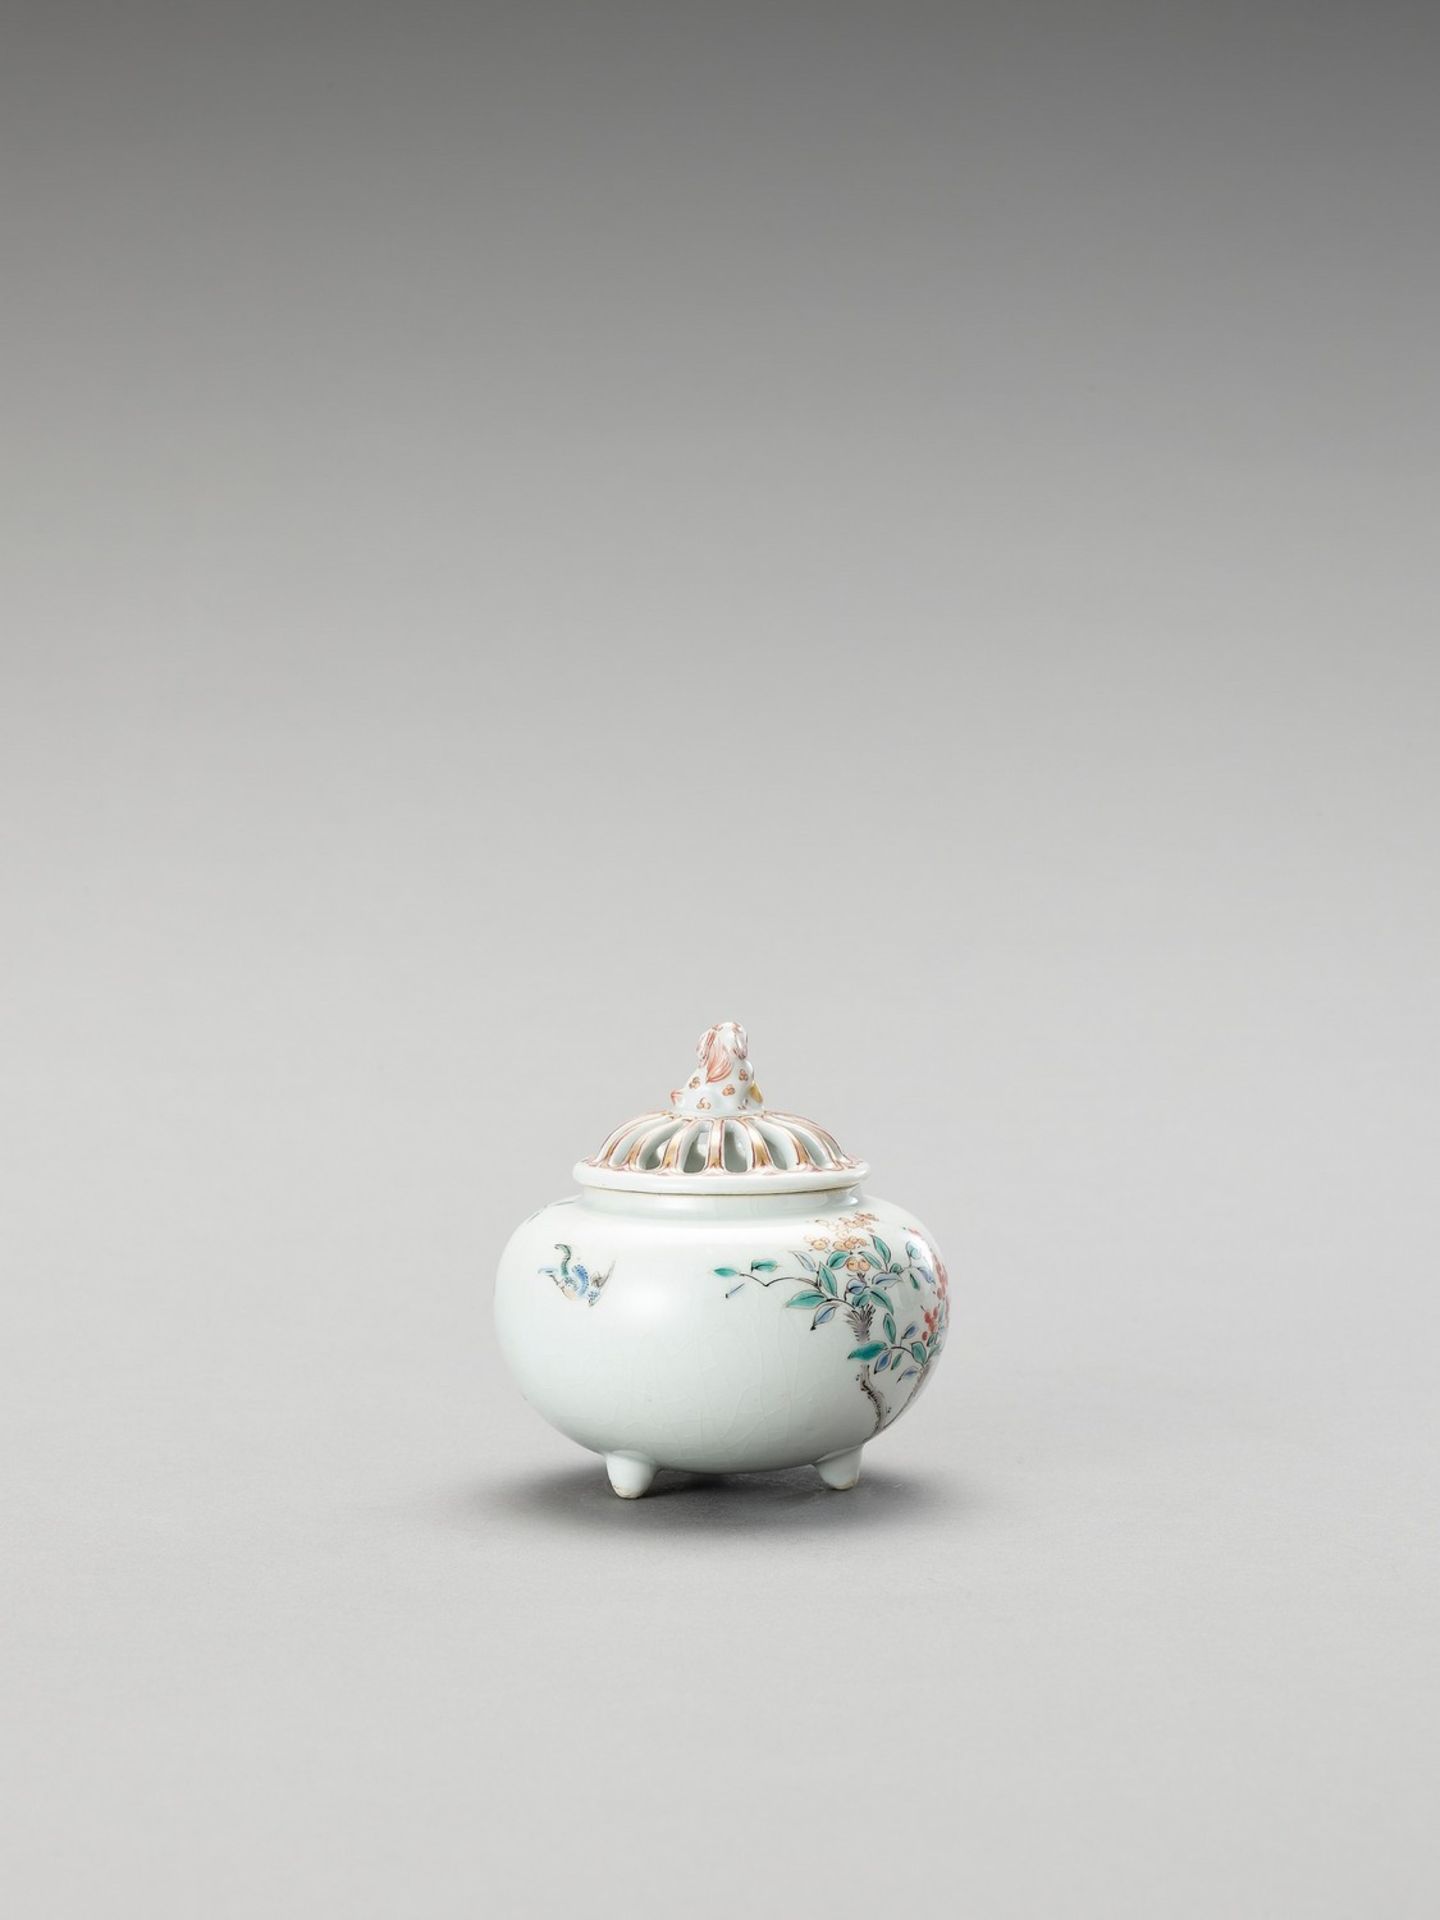 A CHARMING KAKIEMON PORCELAIN INCIENSE BURNER WITH COVER - Image 4 of 6